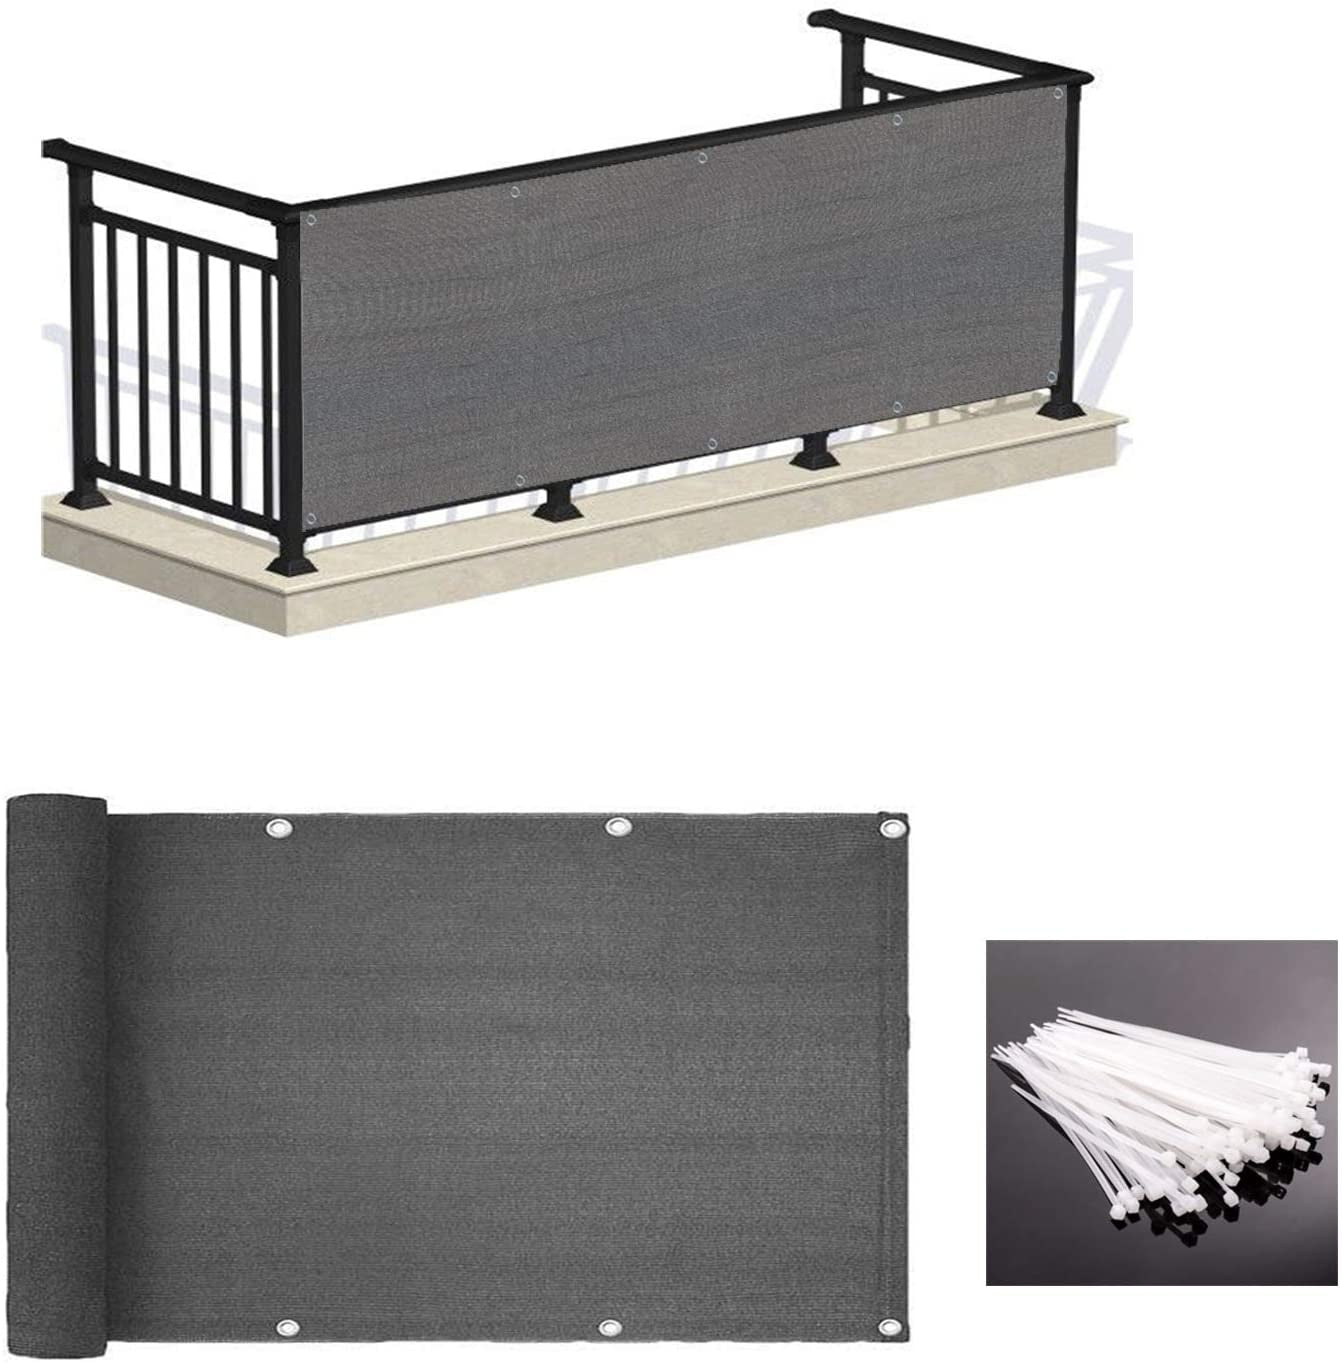 LOVE STORY, LOVE STORY Balcony Privacy Screen, 3.3' X 16.5' Deck Shield Screen Fence Cover,Uv Protection and Weather-Resistant,3 FT Height for Deck, Patio, Backyard, Outdoor Pool, Porch, Railing(Ivory Grey)